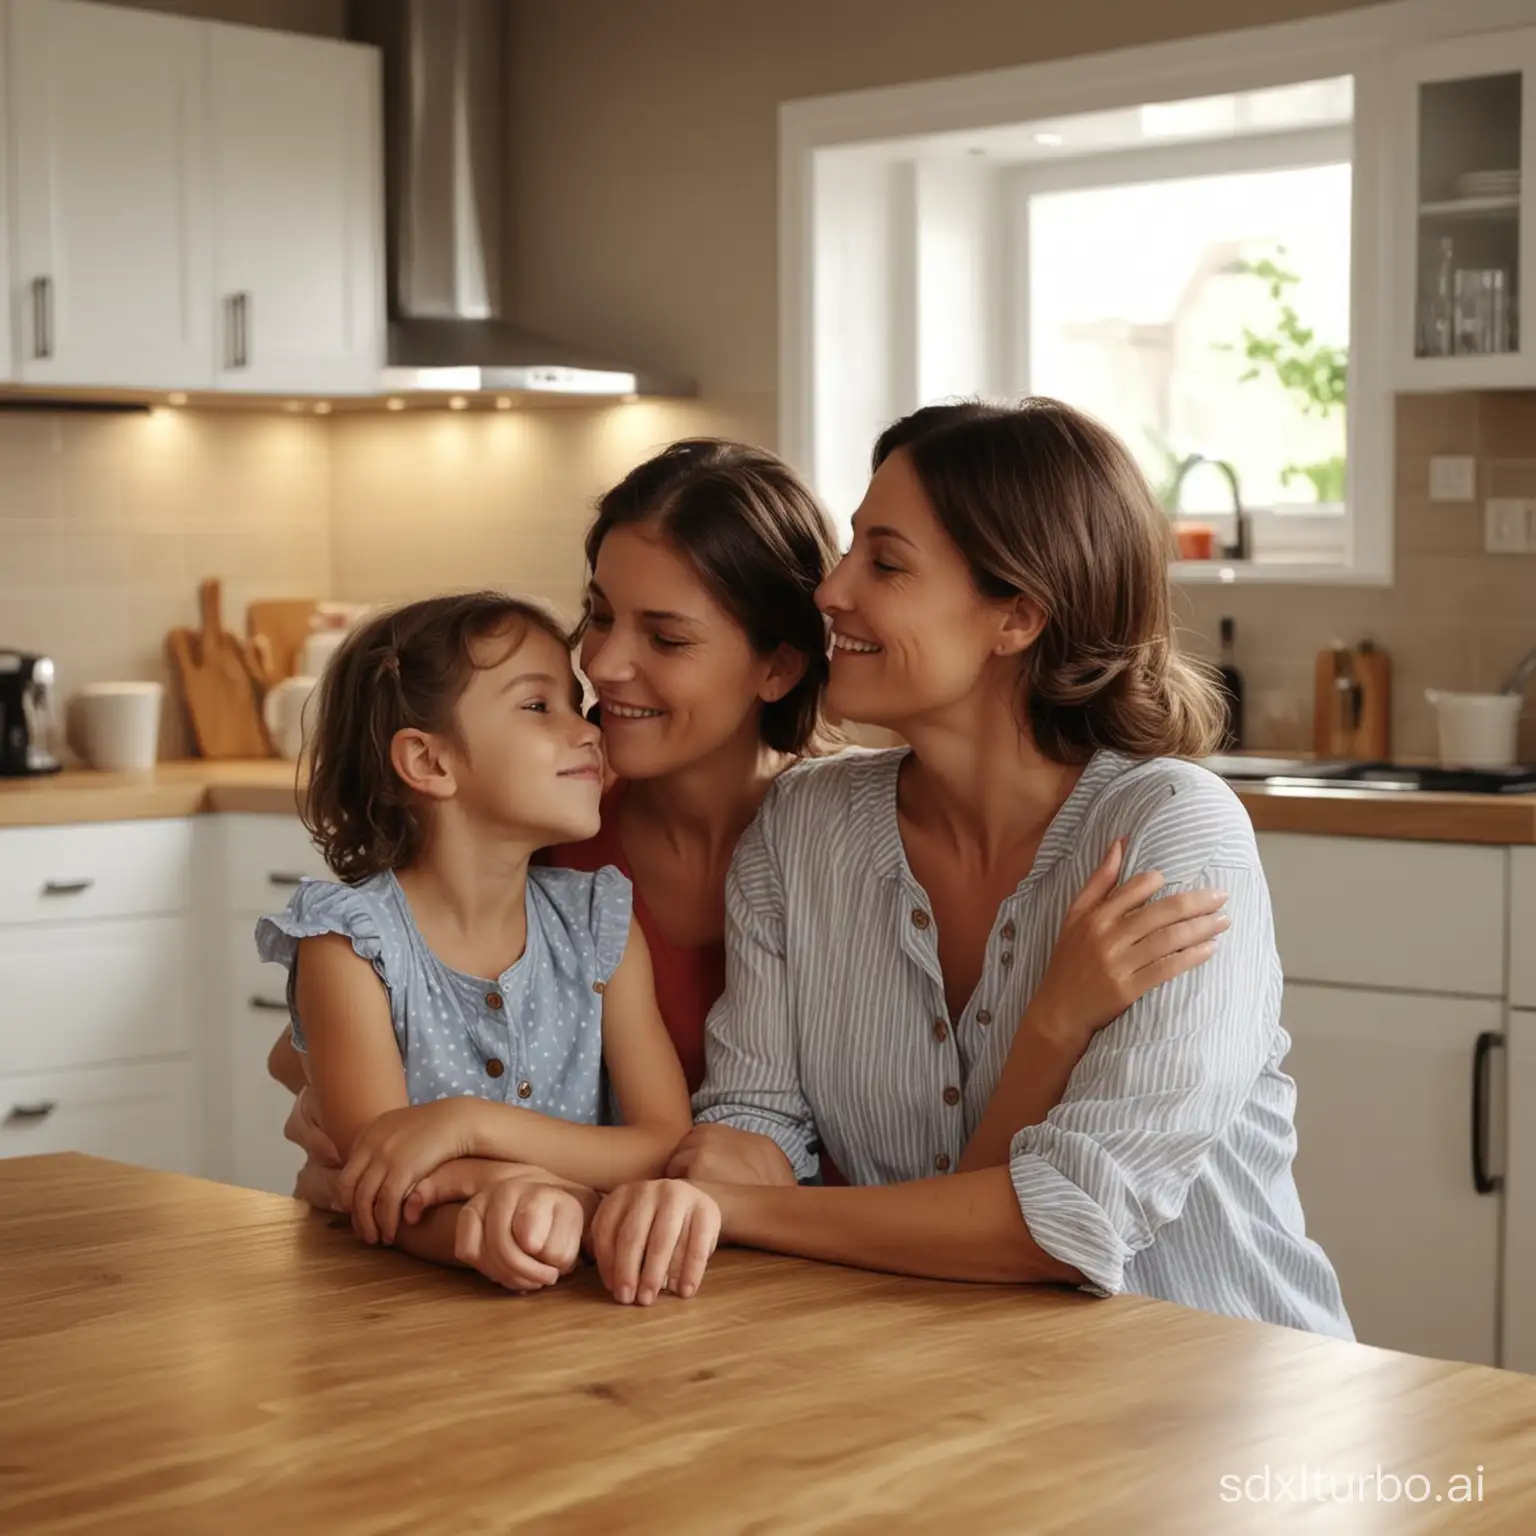 Mothers-Love-Grown-Children-in-a-Kitchen-Setting-Cinematic-HD-8K-Image